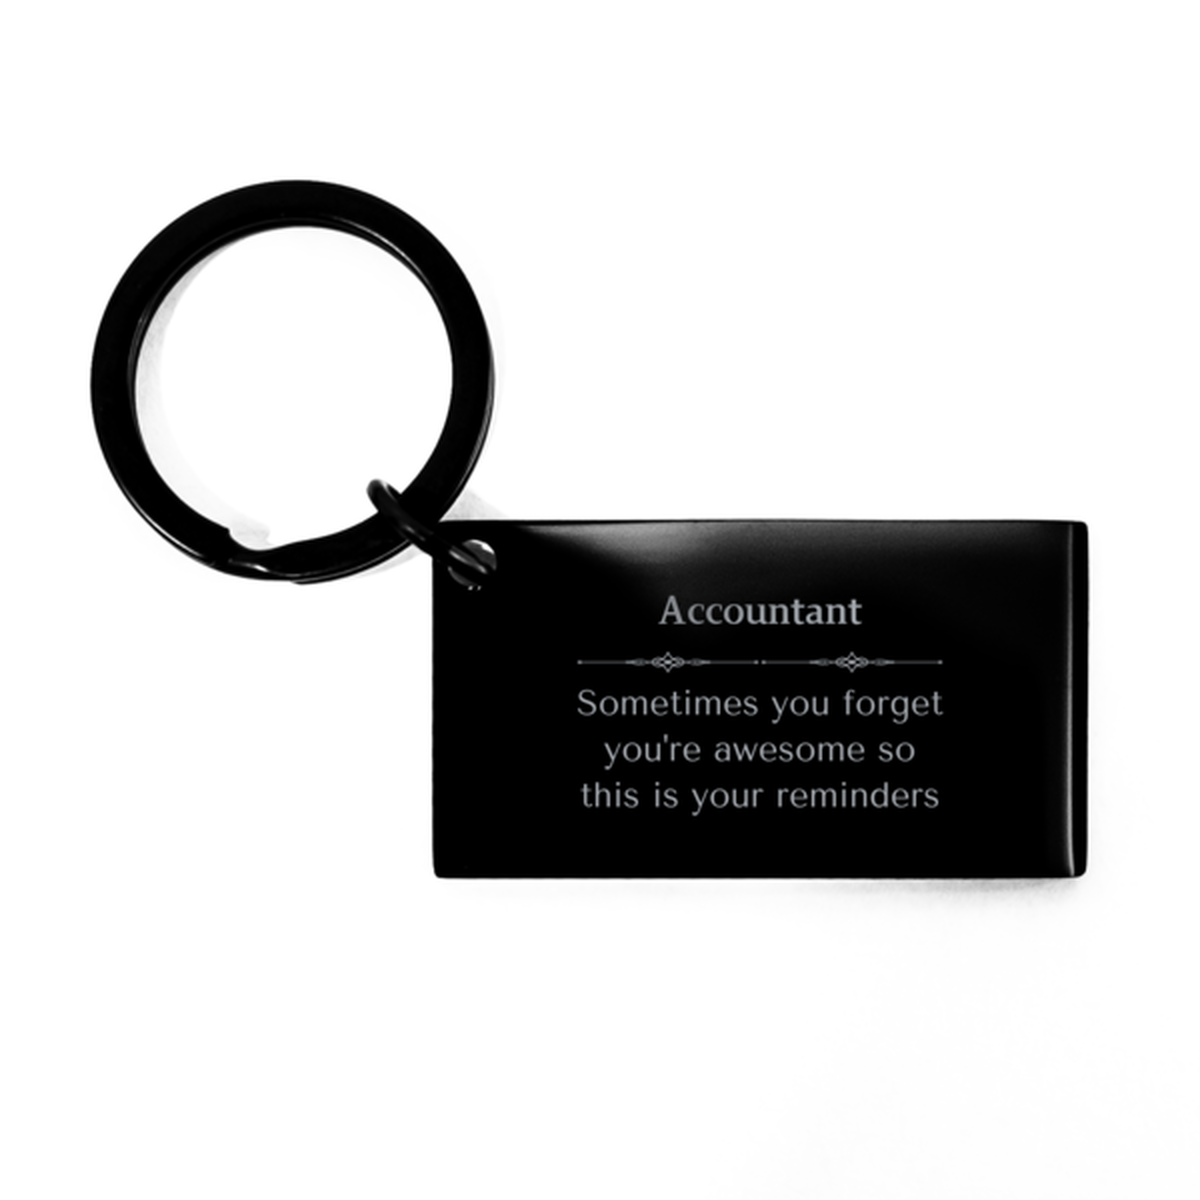 Sentimental Accountant Keychain, Barber Sometimes you forget you're awesome so this is your reminders, Graduation Christmas Birthday Gifts for Accountant, Men, Women, Coworkers